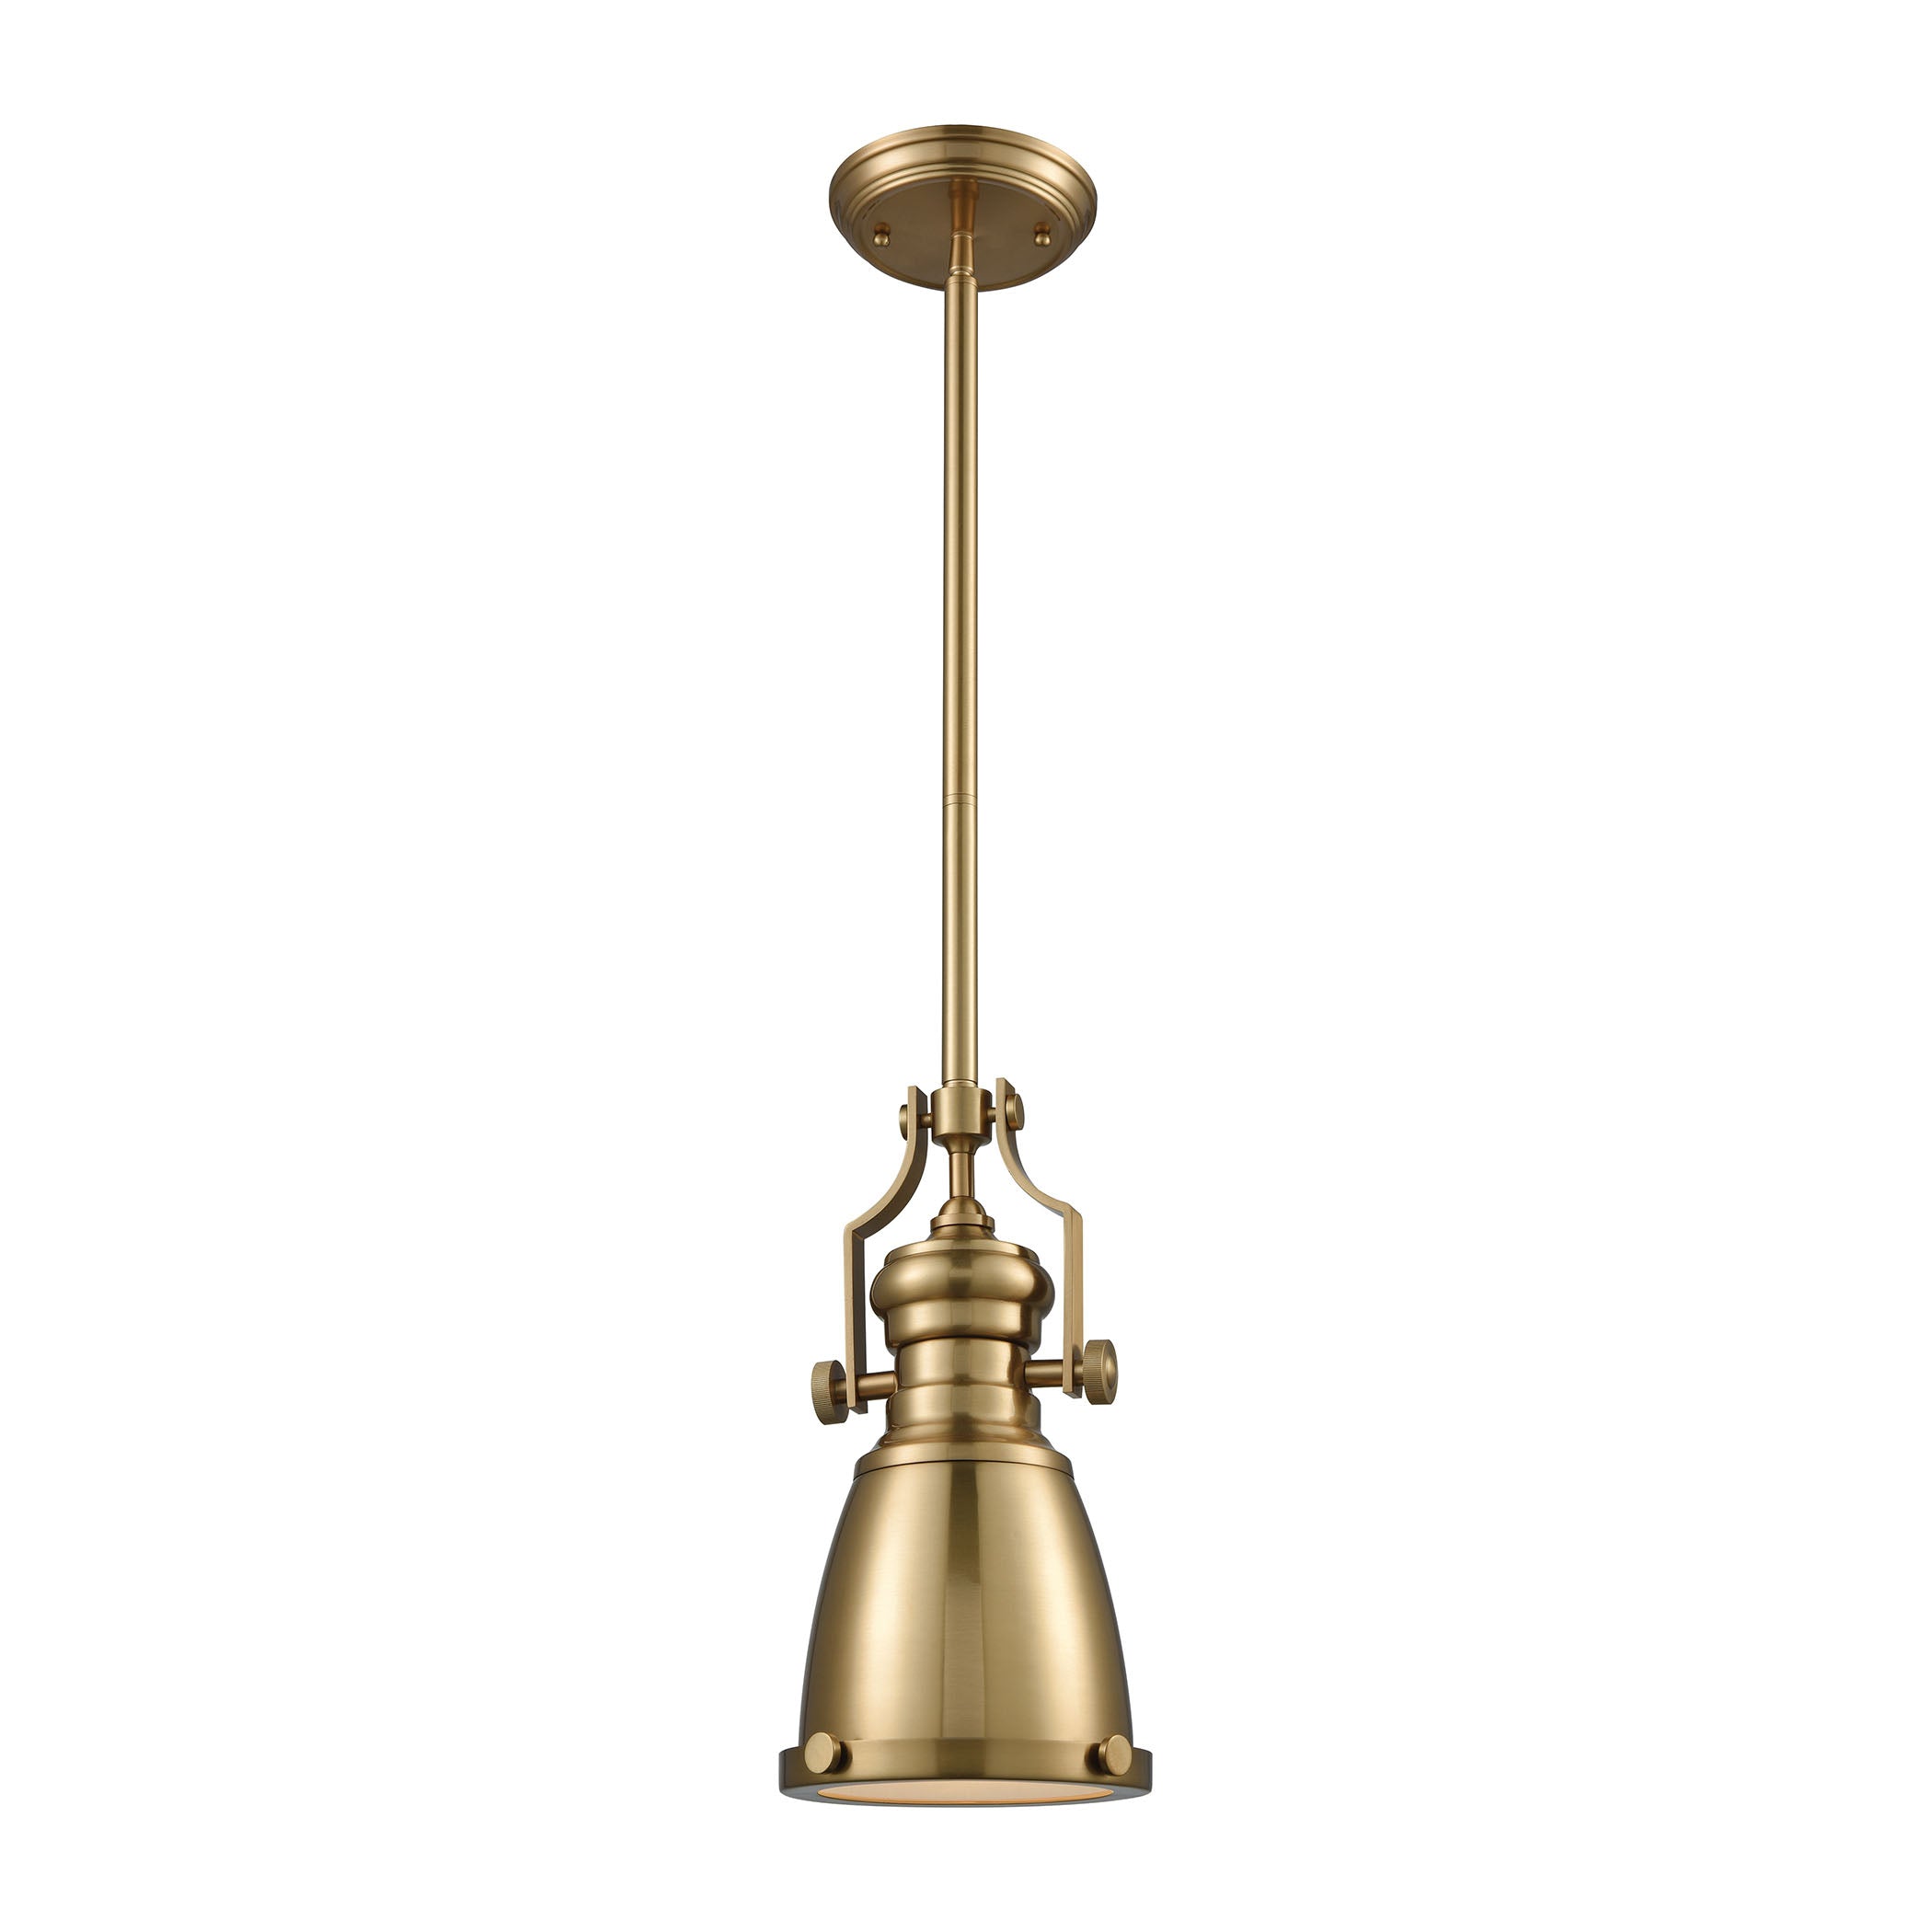 ELK Lighting 66599-1-LA Chadwick 1-Light Mini Pendant in Satin Brass with Metal Shade - Includes Recessed Adapter Kit